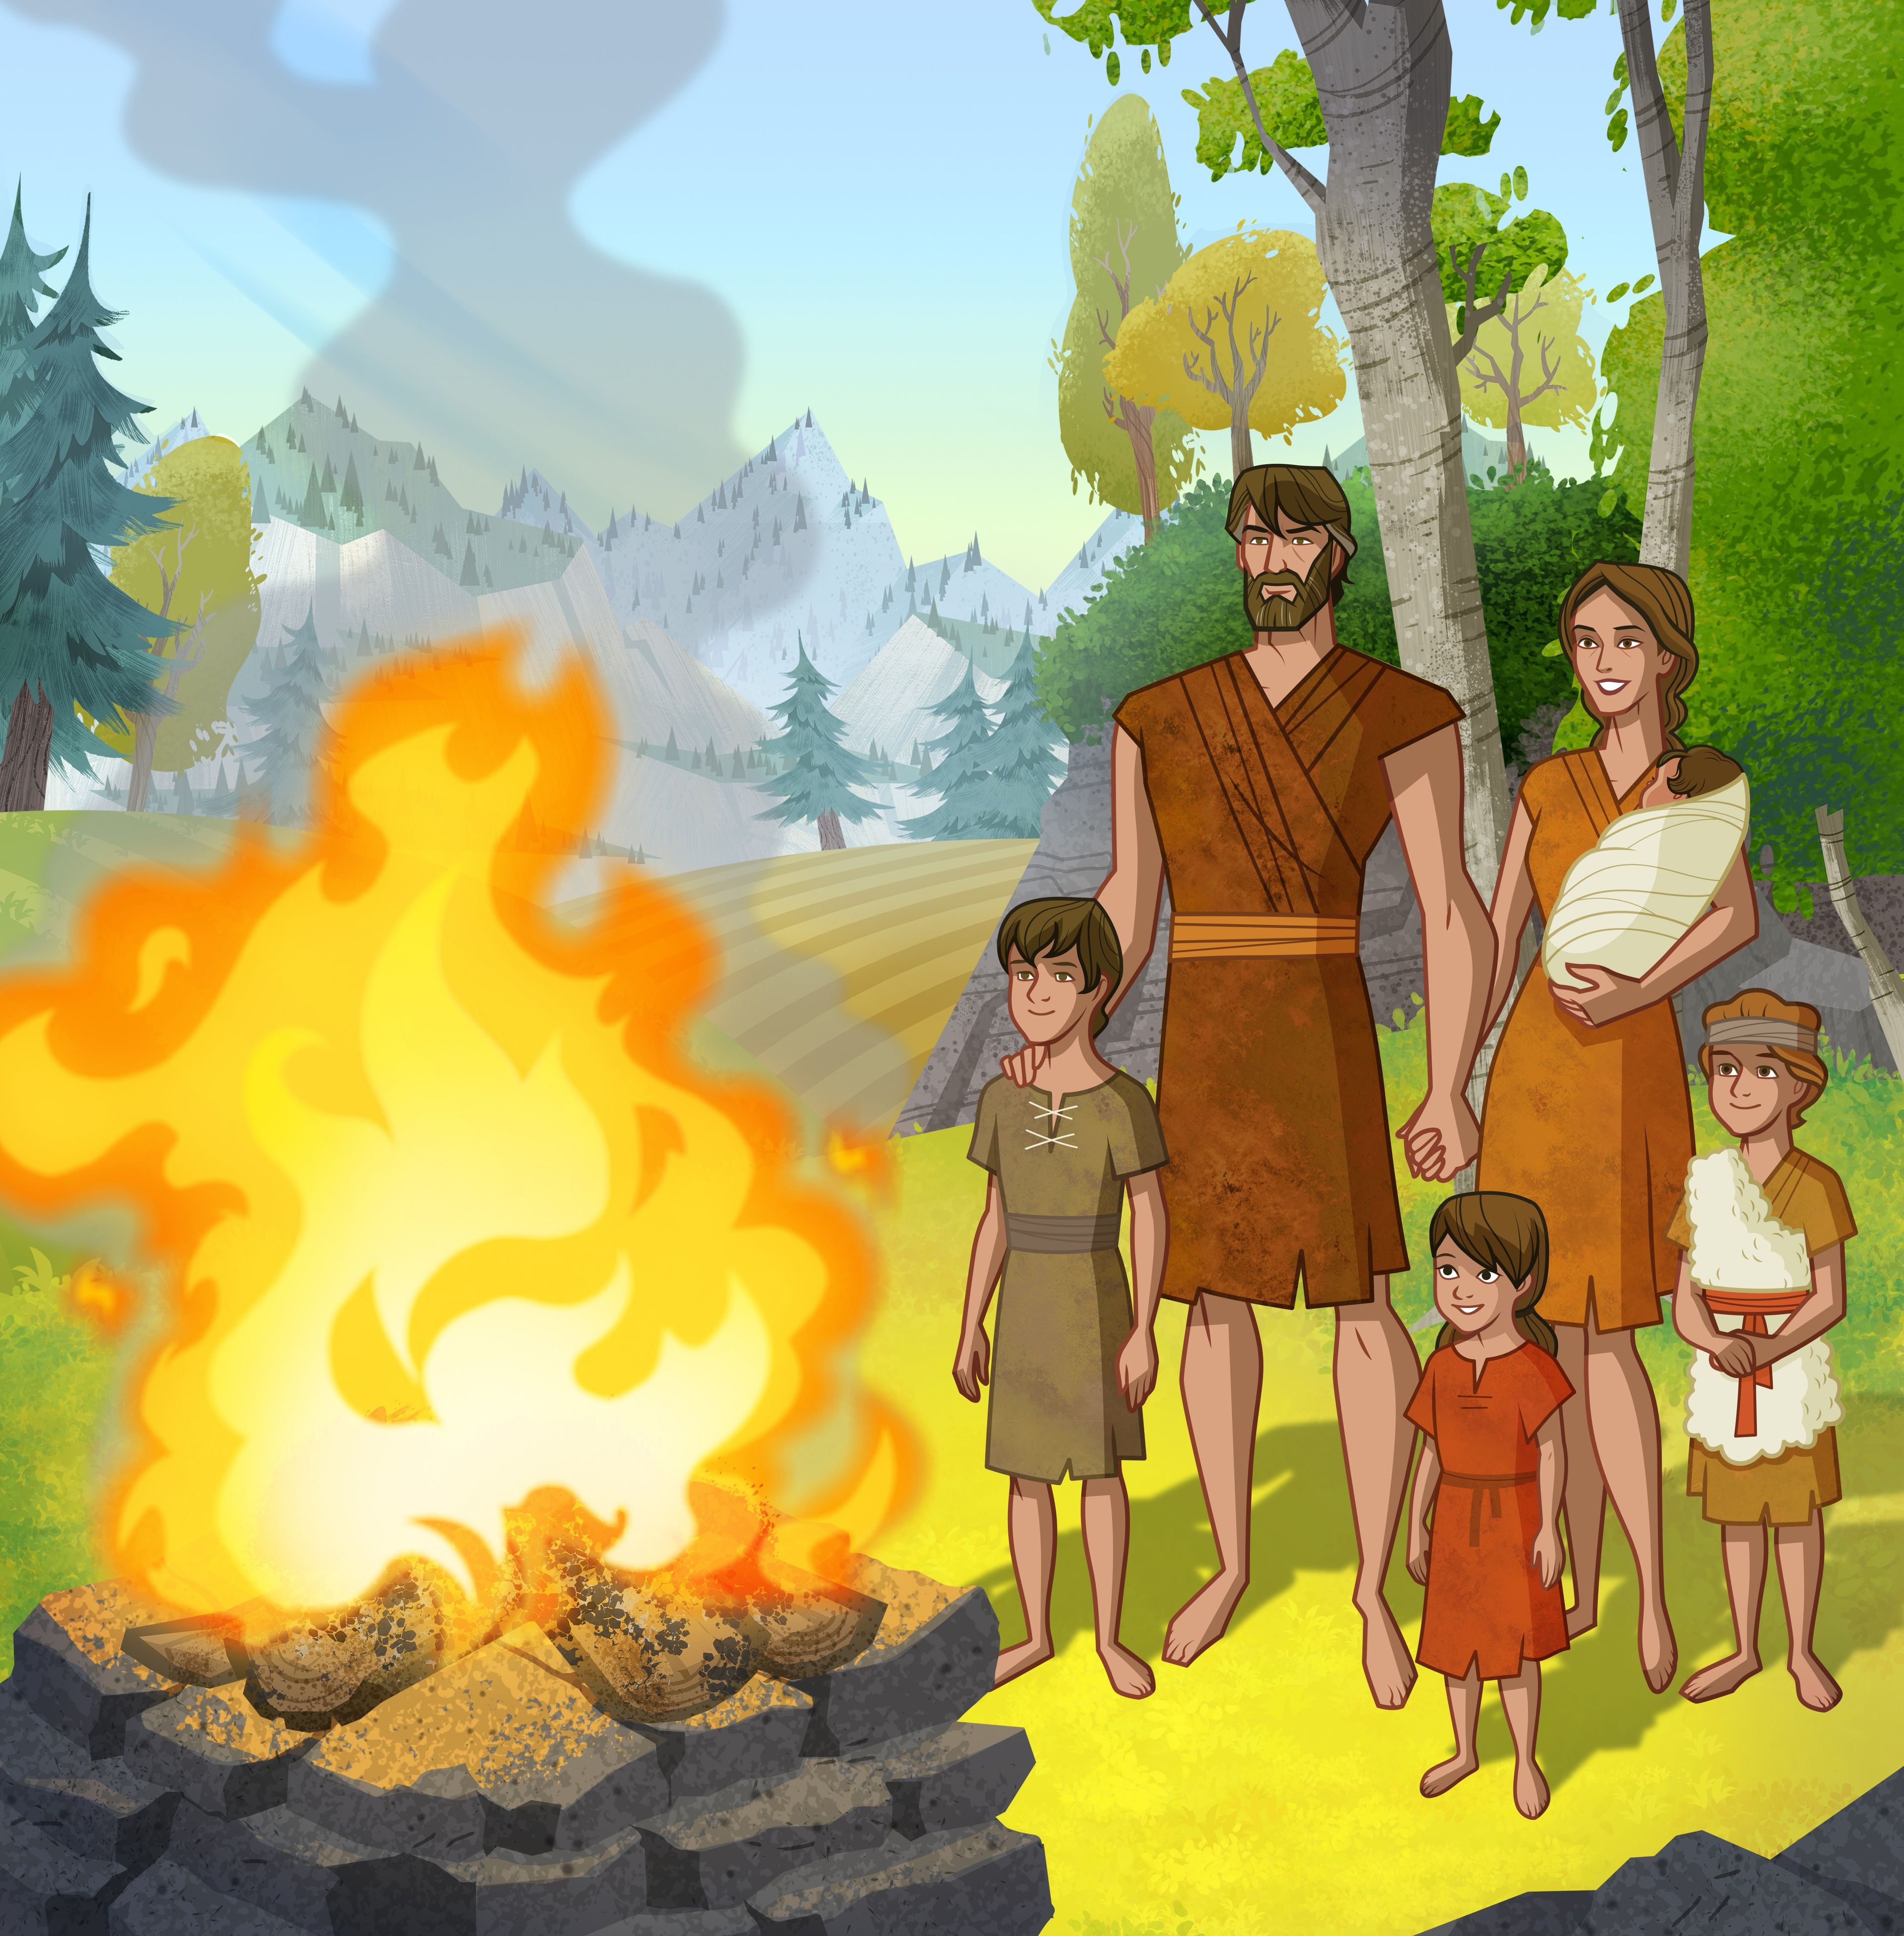 Illustration of Adam and Eve’s family looking at an alter which is burning an offering. Genesis 3:23; Moses 5:1–12